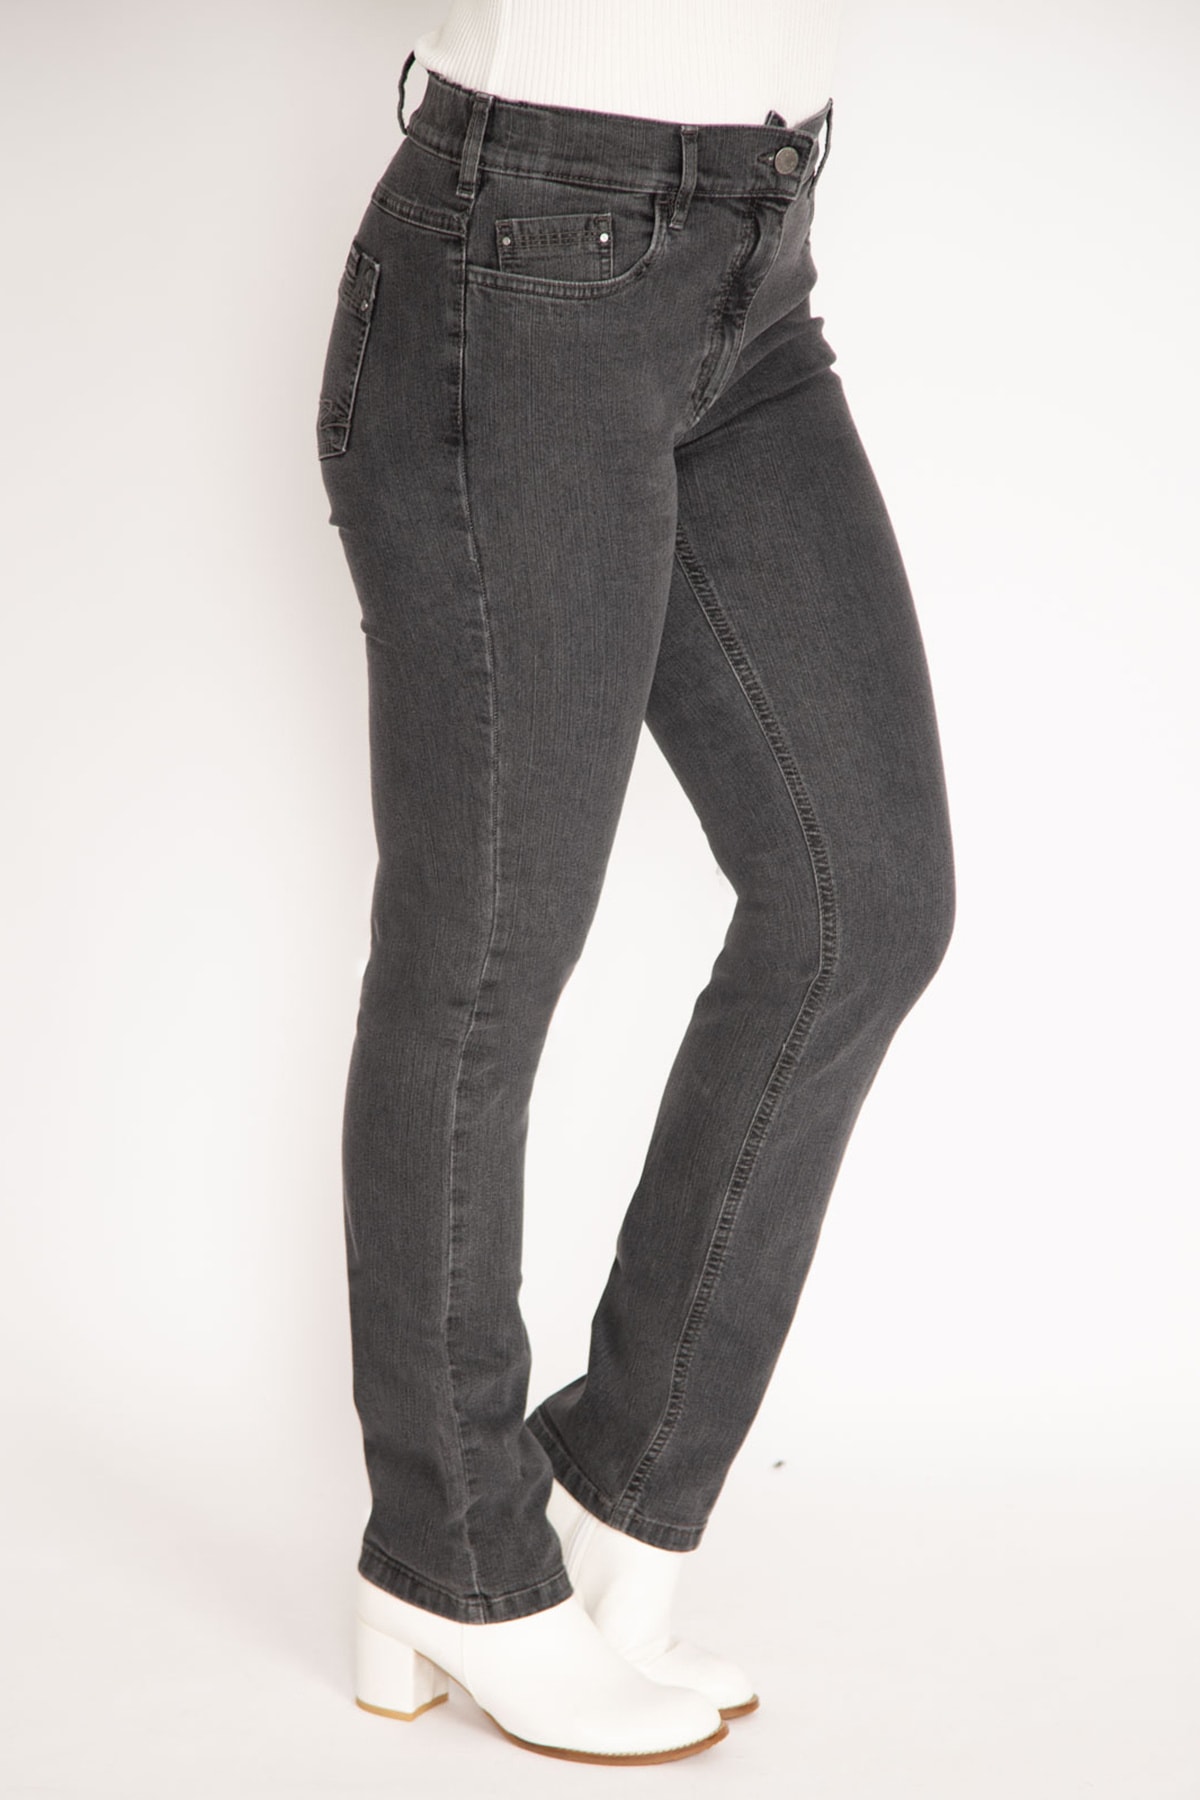 Şans Women's Plus Size Smoked Jeans with 5 Pockets